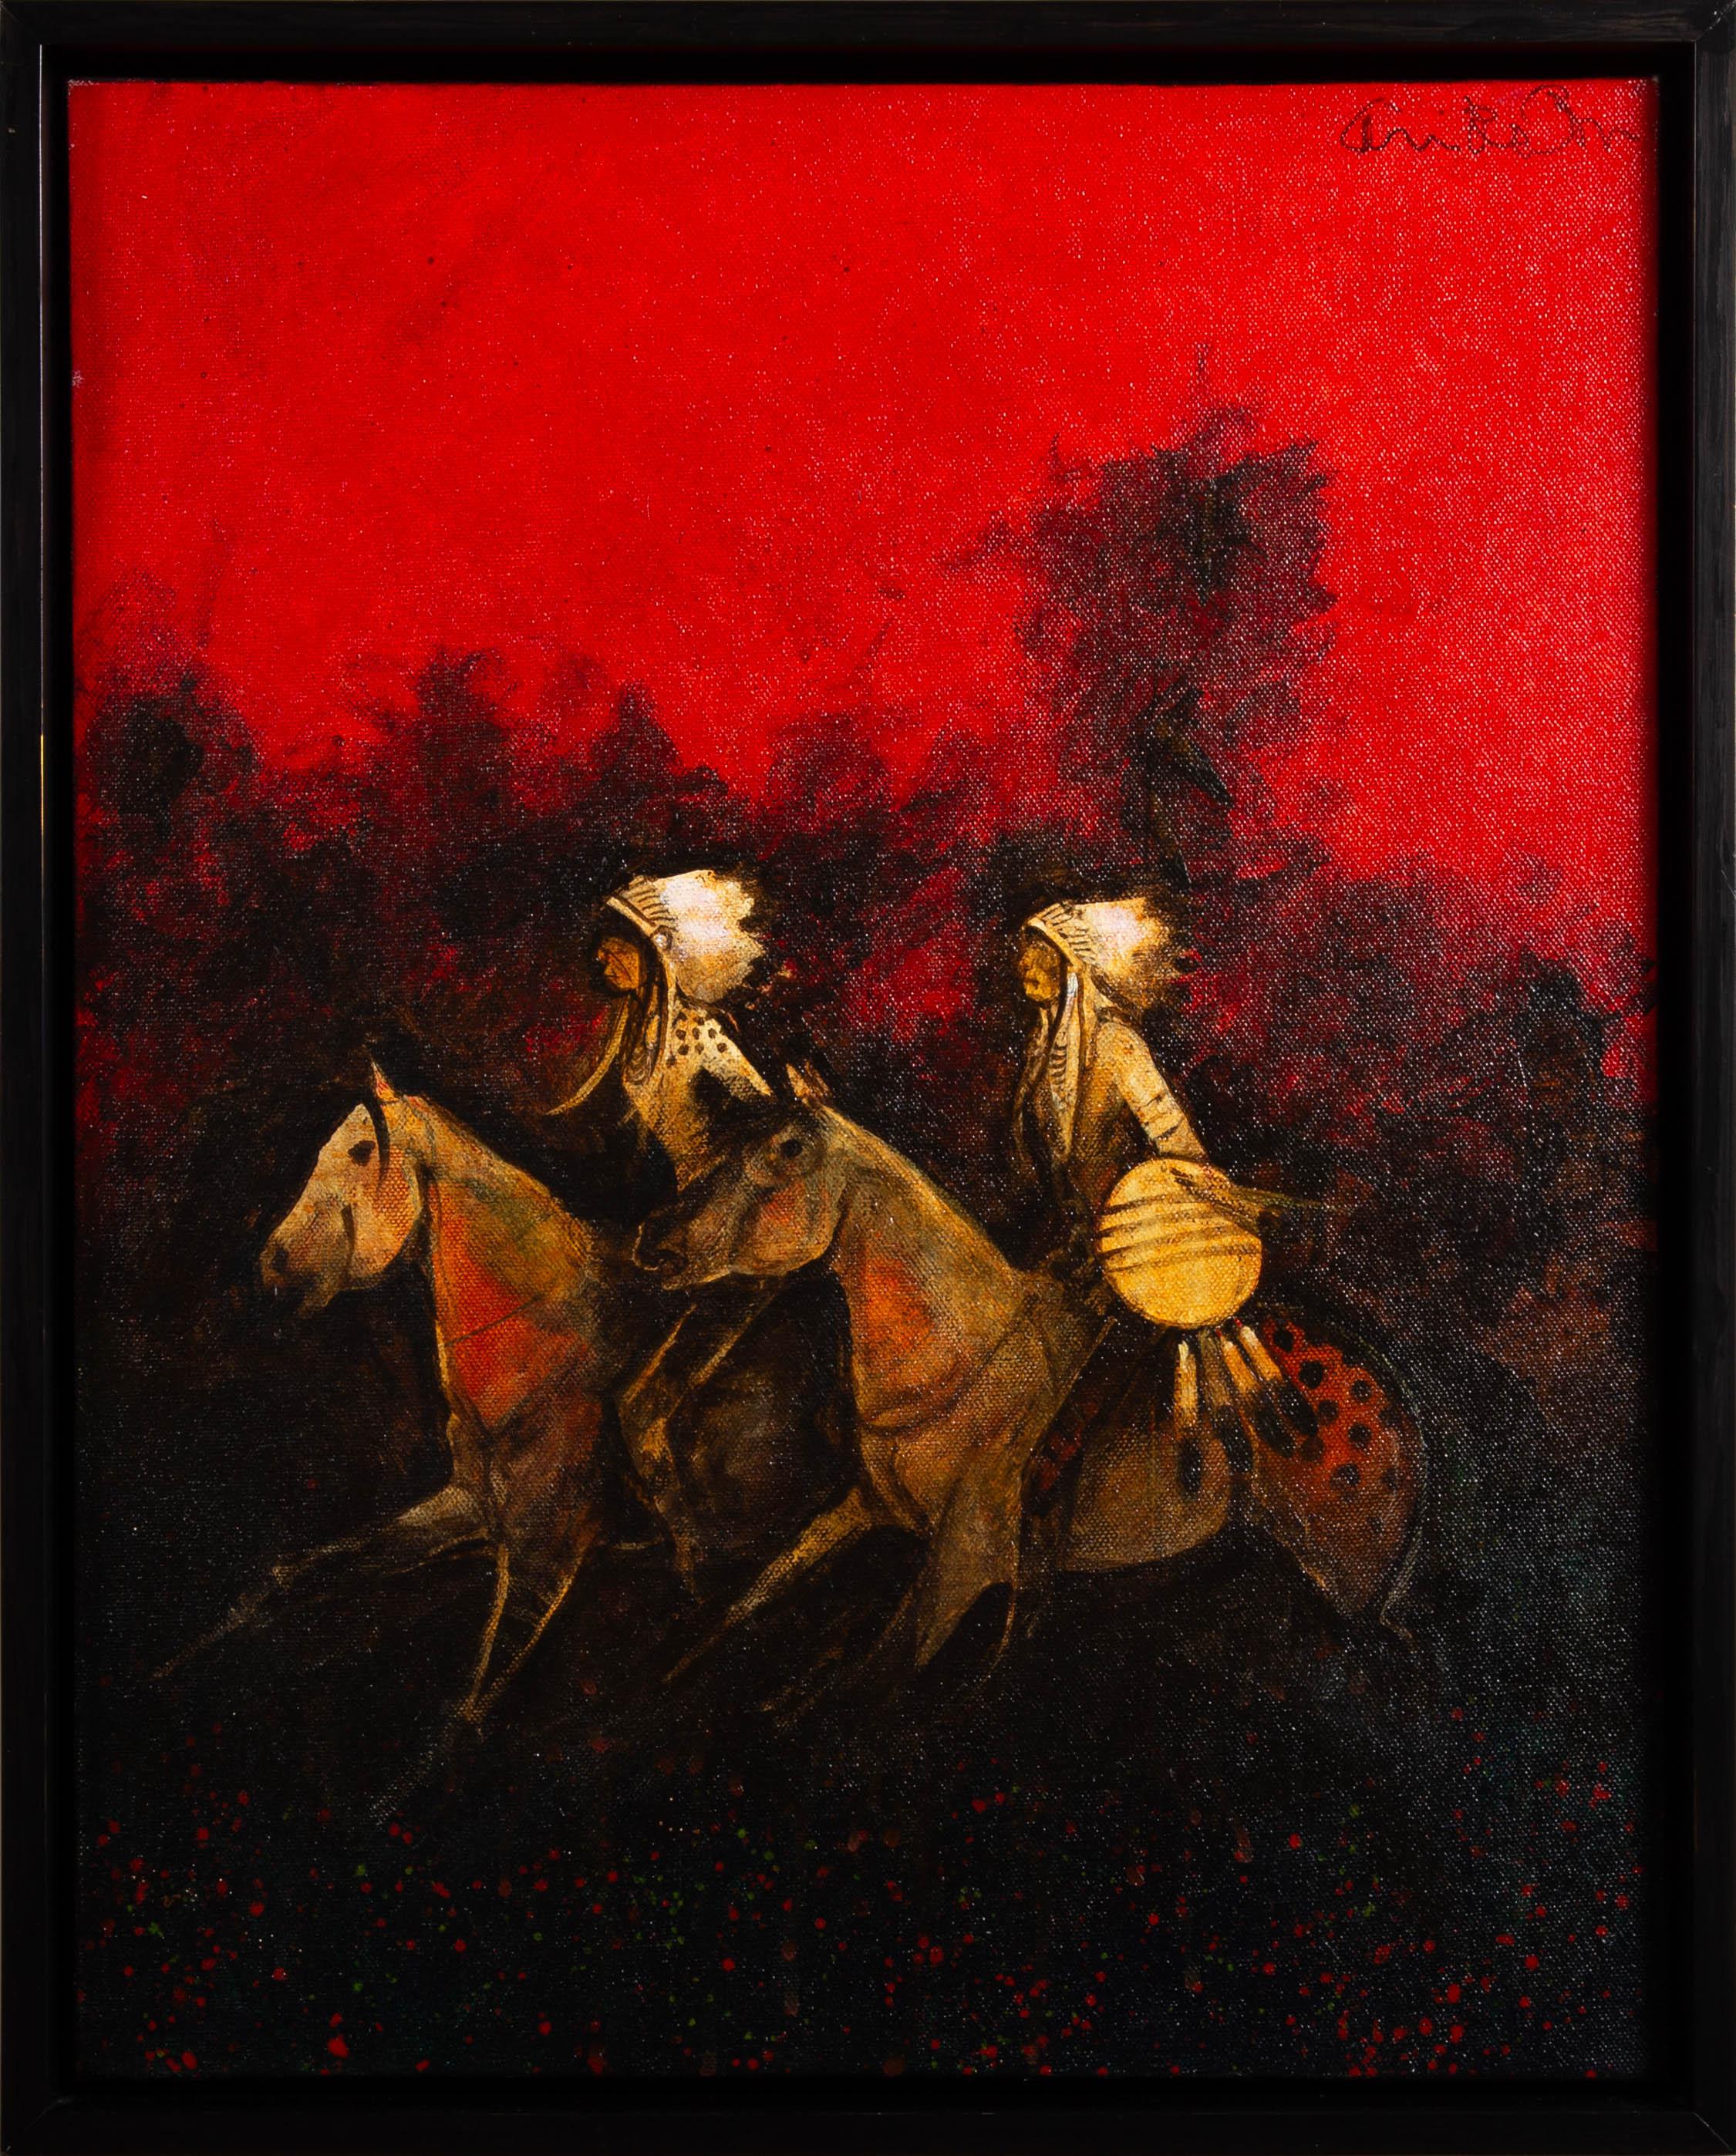 "Small War Party - Study" by Kevin Red Star. These are Scouts that stay fairly close to camp watching over the people. Acrylic, Mixed Media on Canvas, 20" x 16", 23" x 19" (framed in a deep floater). Signed upper right. Comes ready to hang with